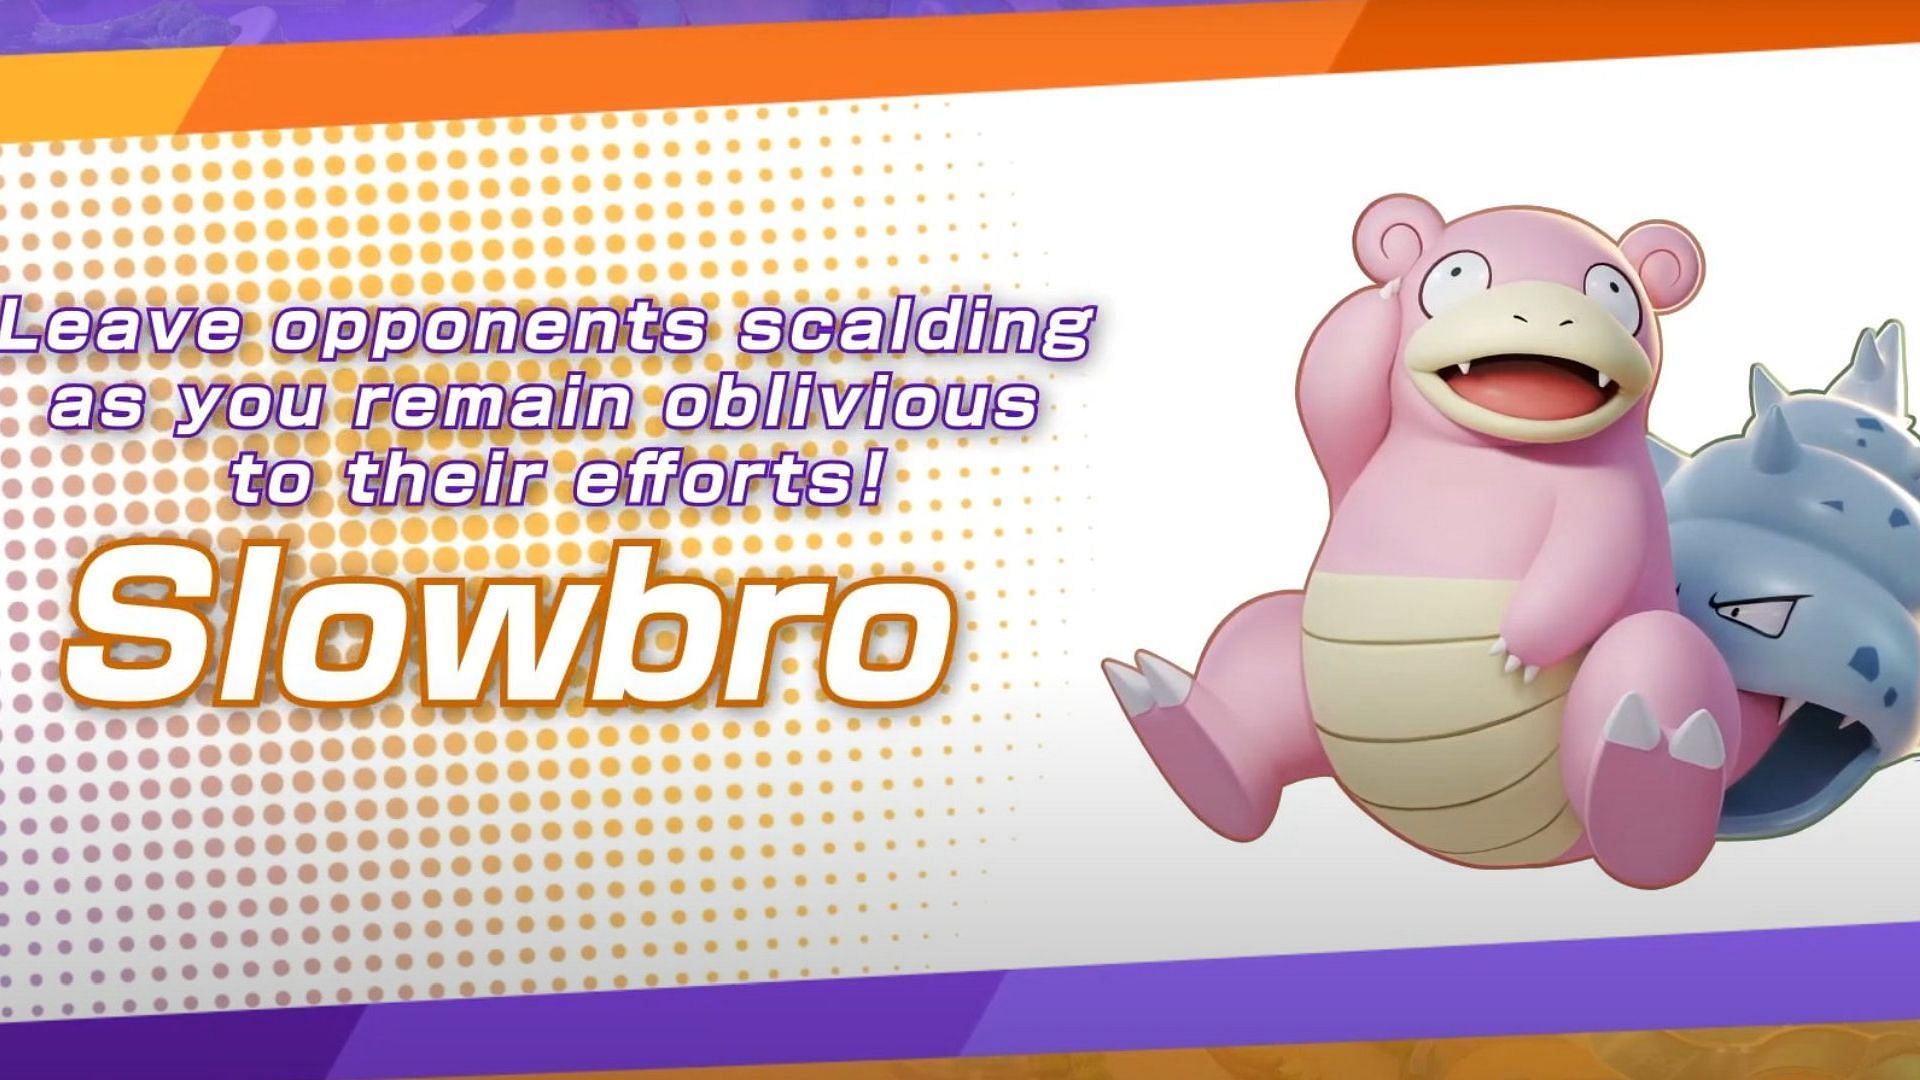 Official imagery for Slowbro used for Pokemon Unite (Image via The Pokemon Company)